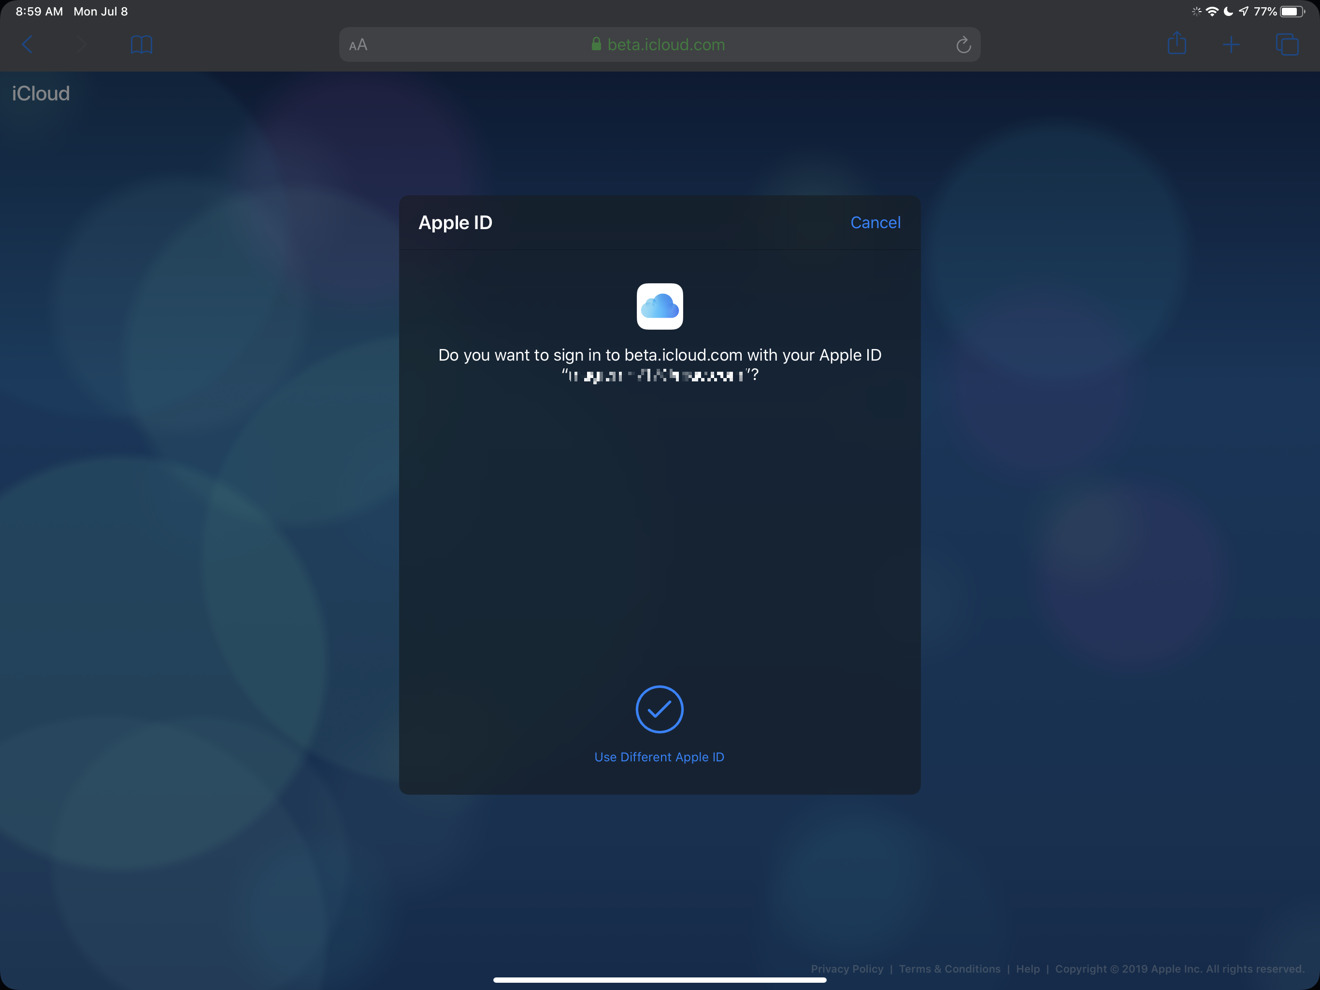 The sign-in screen of the iCloud beta page from within iPadOS